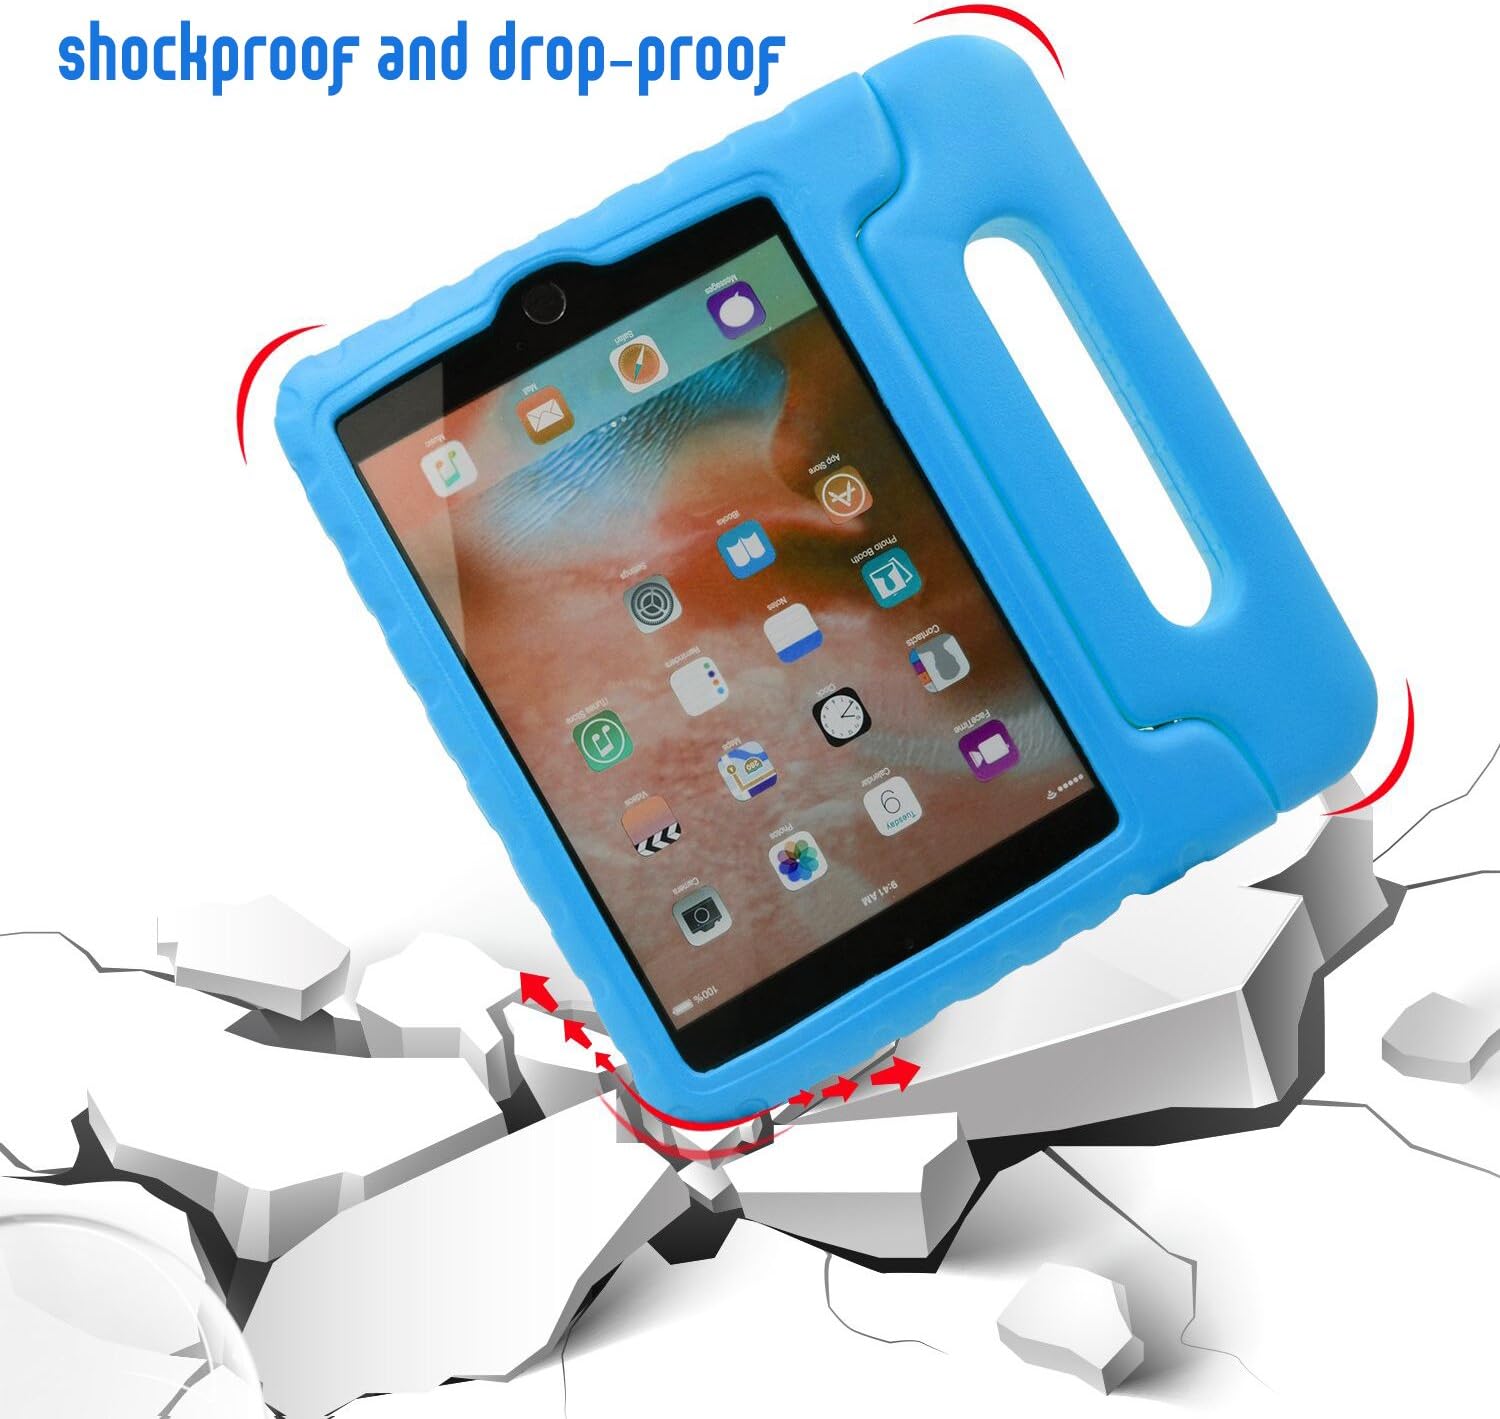 Shockproof Handle case with Stand for iPad Mini 1/2/3/4/5 with 7.9 inch Screen (Blue)